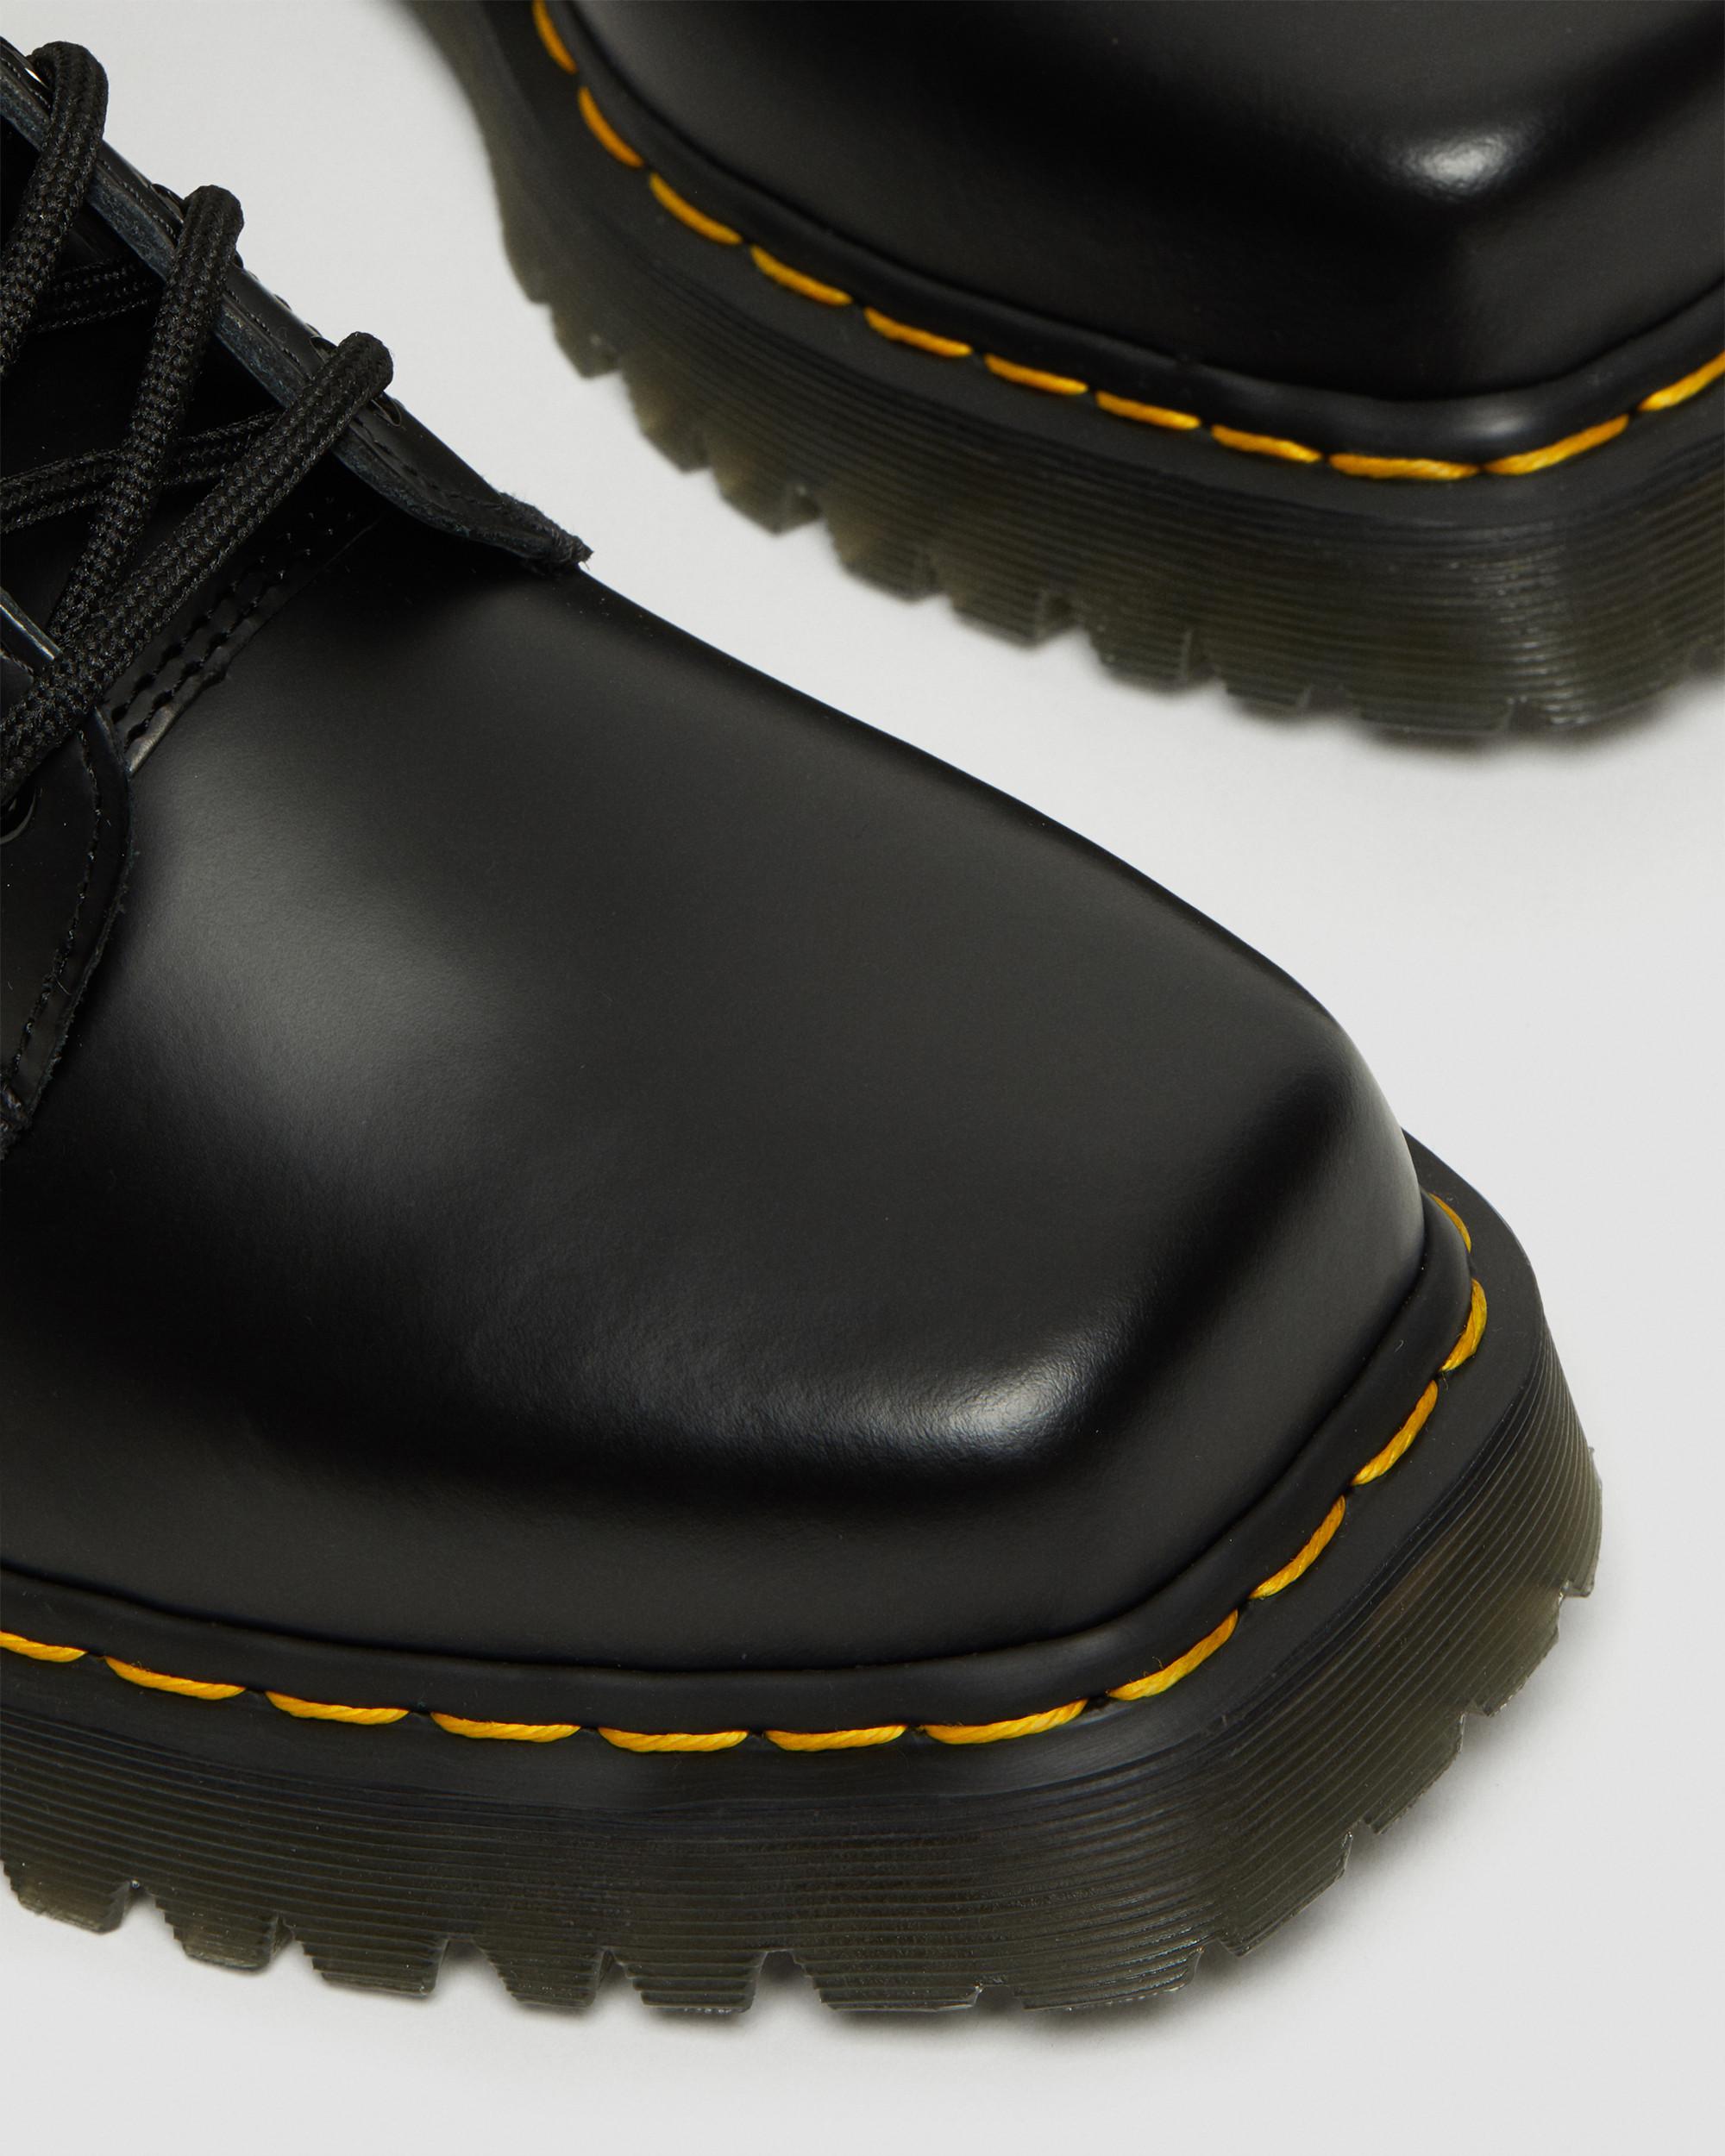 Dr. Martens 1460 Bex Squared 8 Eye Boot